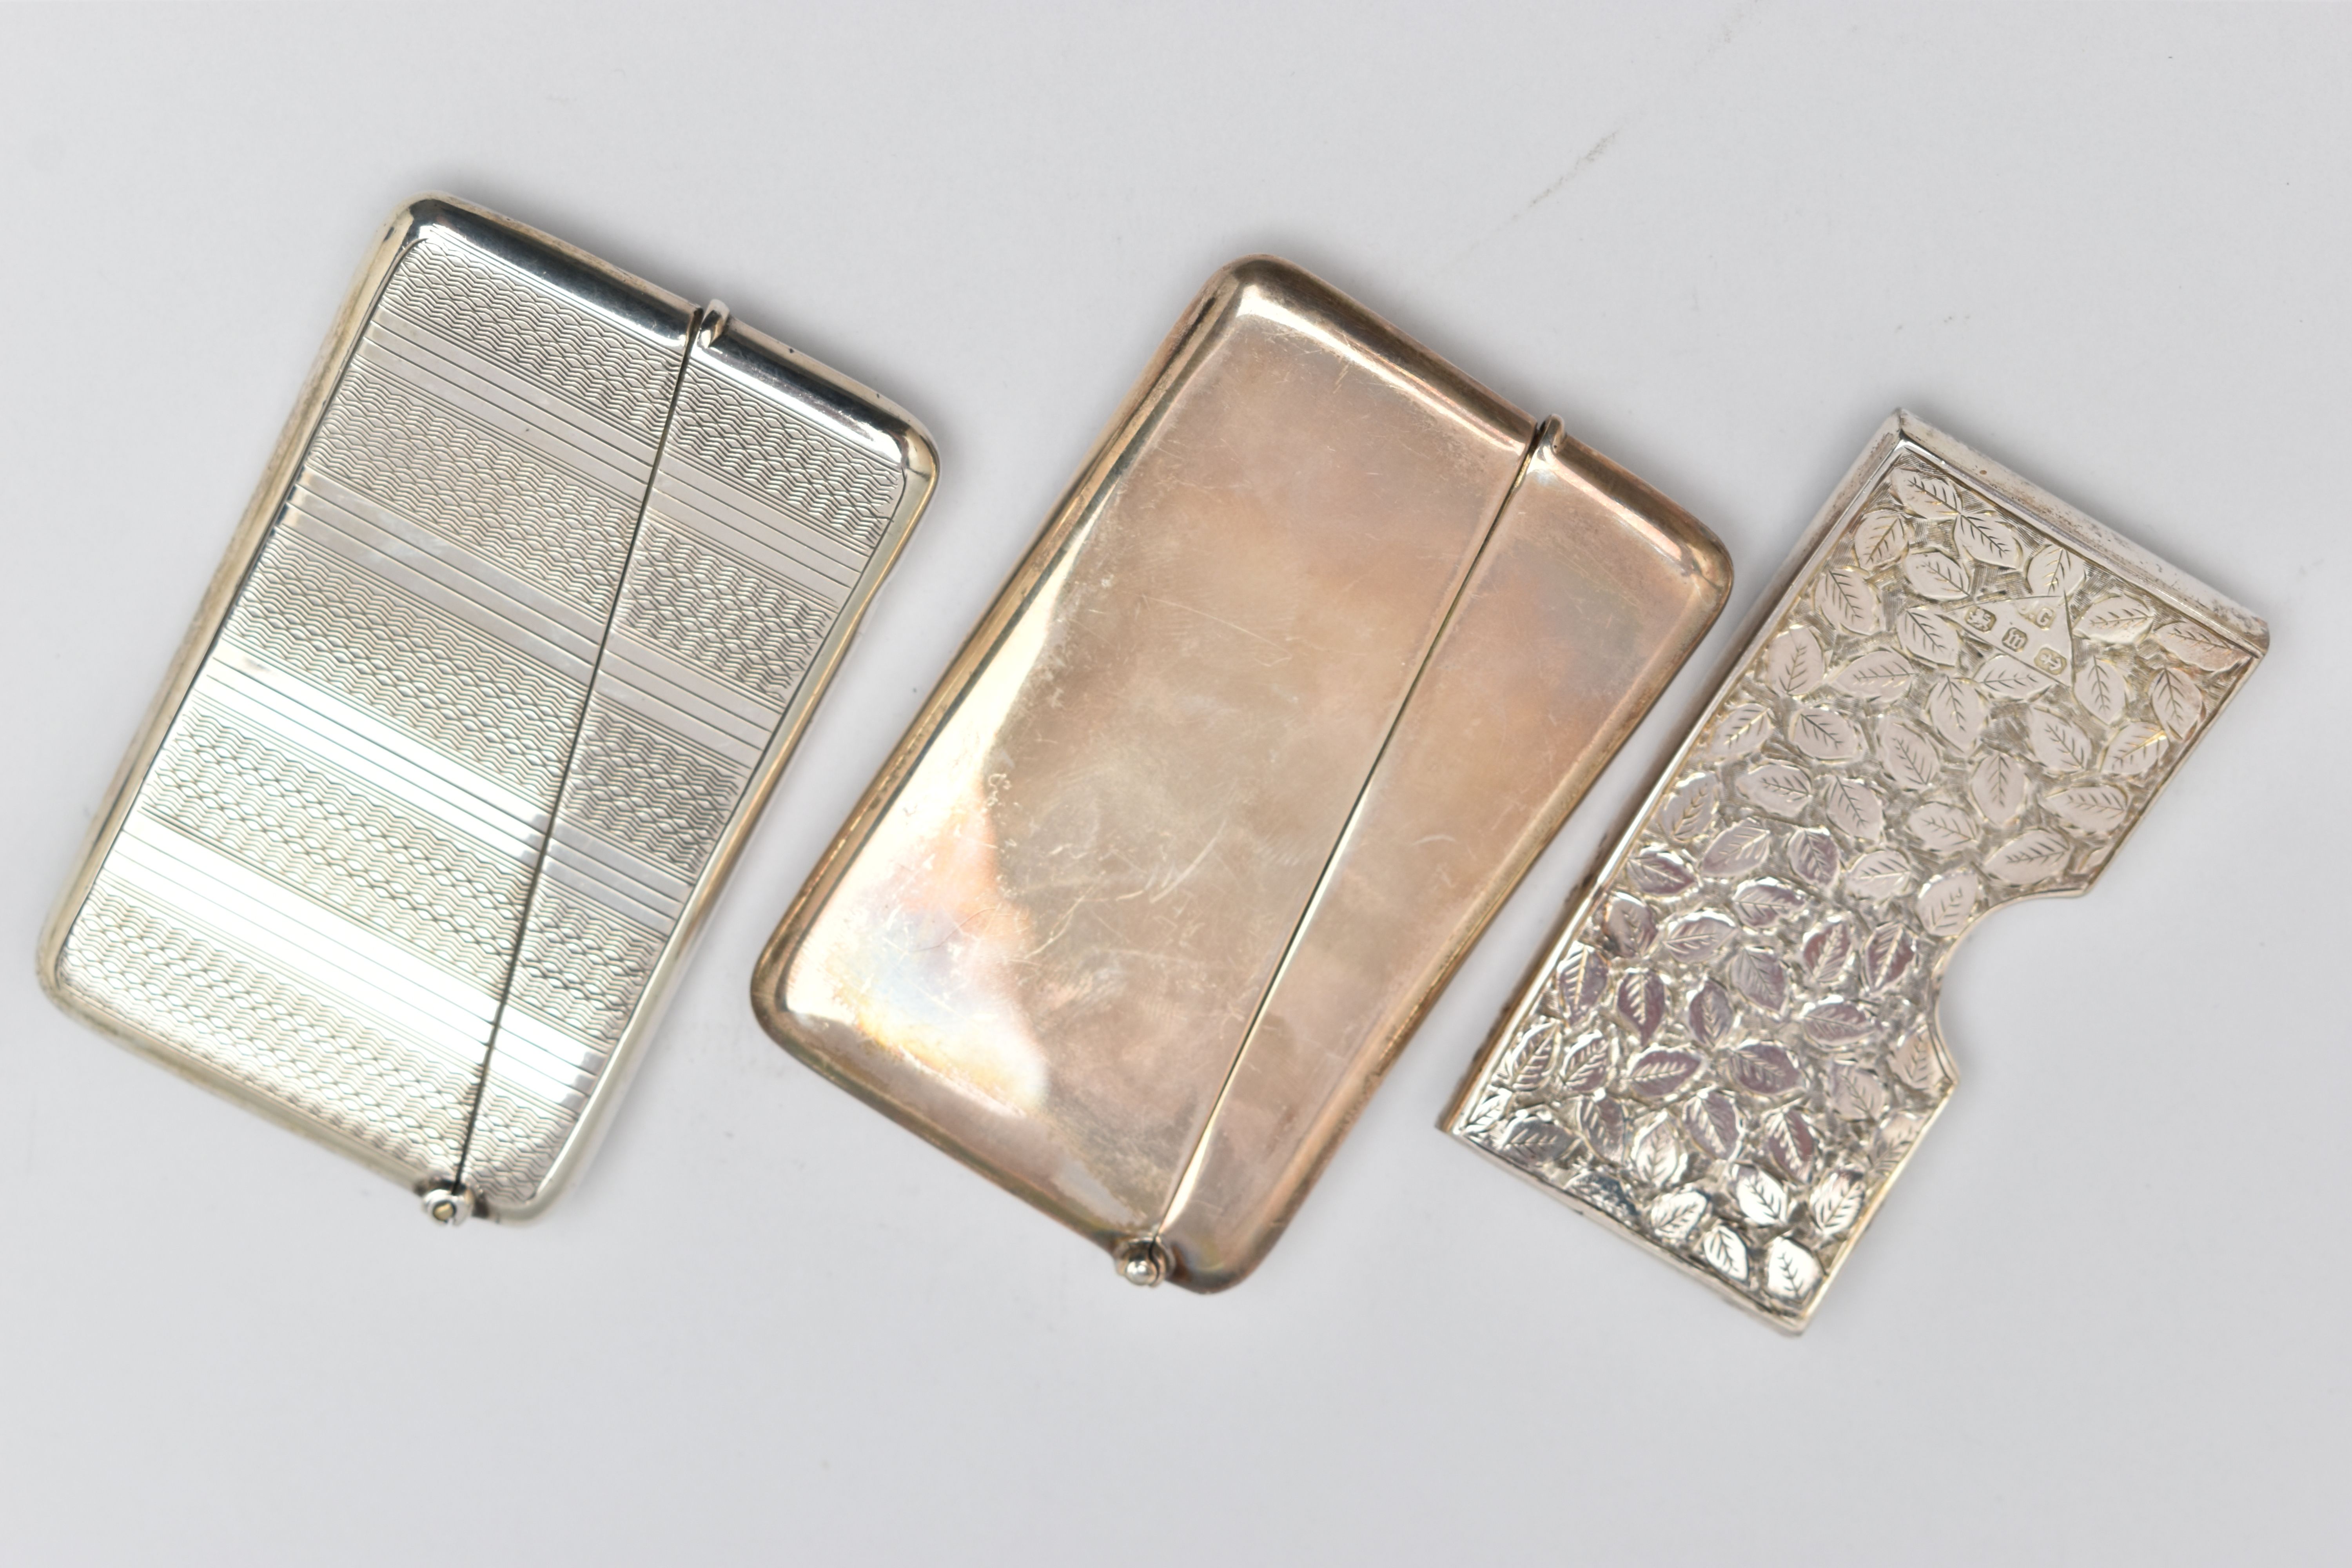 THREE LATE 19TH TO EARLY 20TH CENTURY SILVER CARD CASES, all of rectangular outline, two with hinged - Image 2 of 3